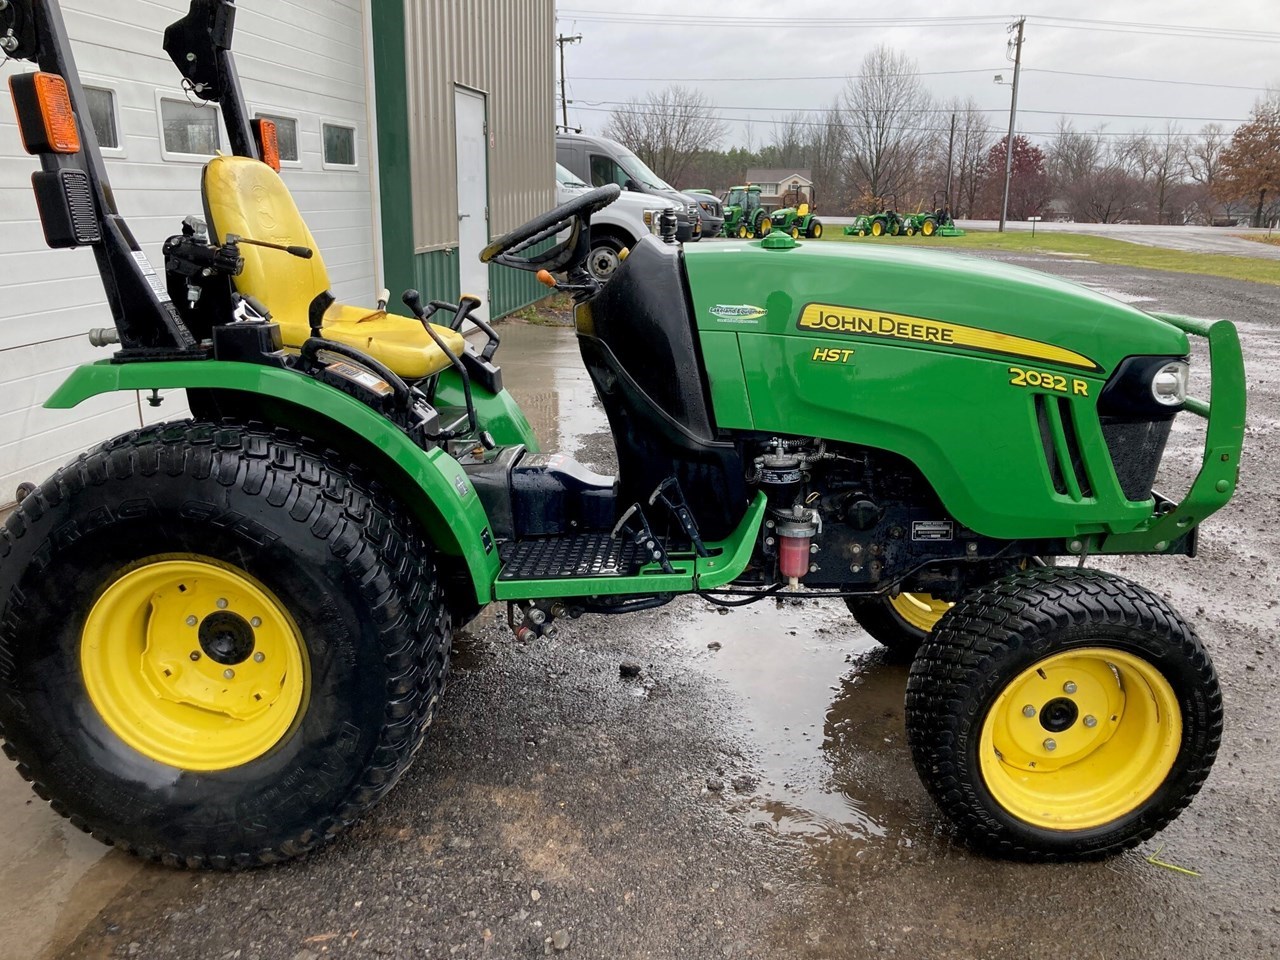 2015 John Deere 2032r Compact Utility Tractor For Sale In Brockport New